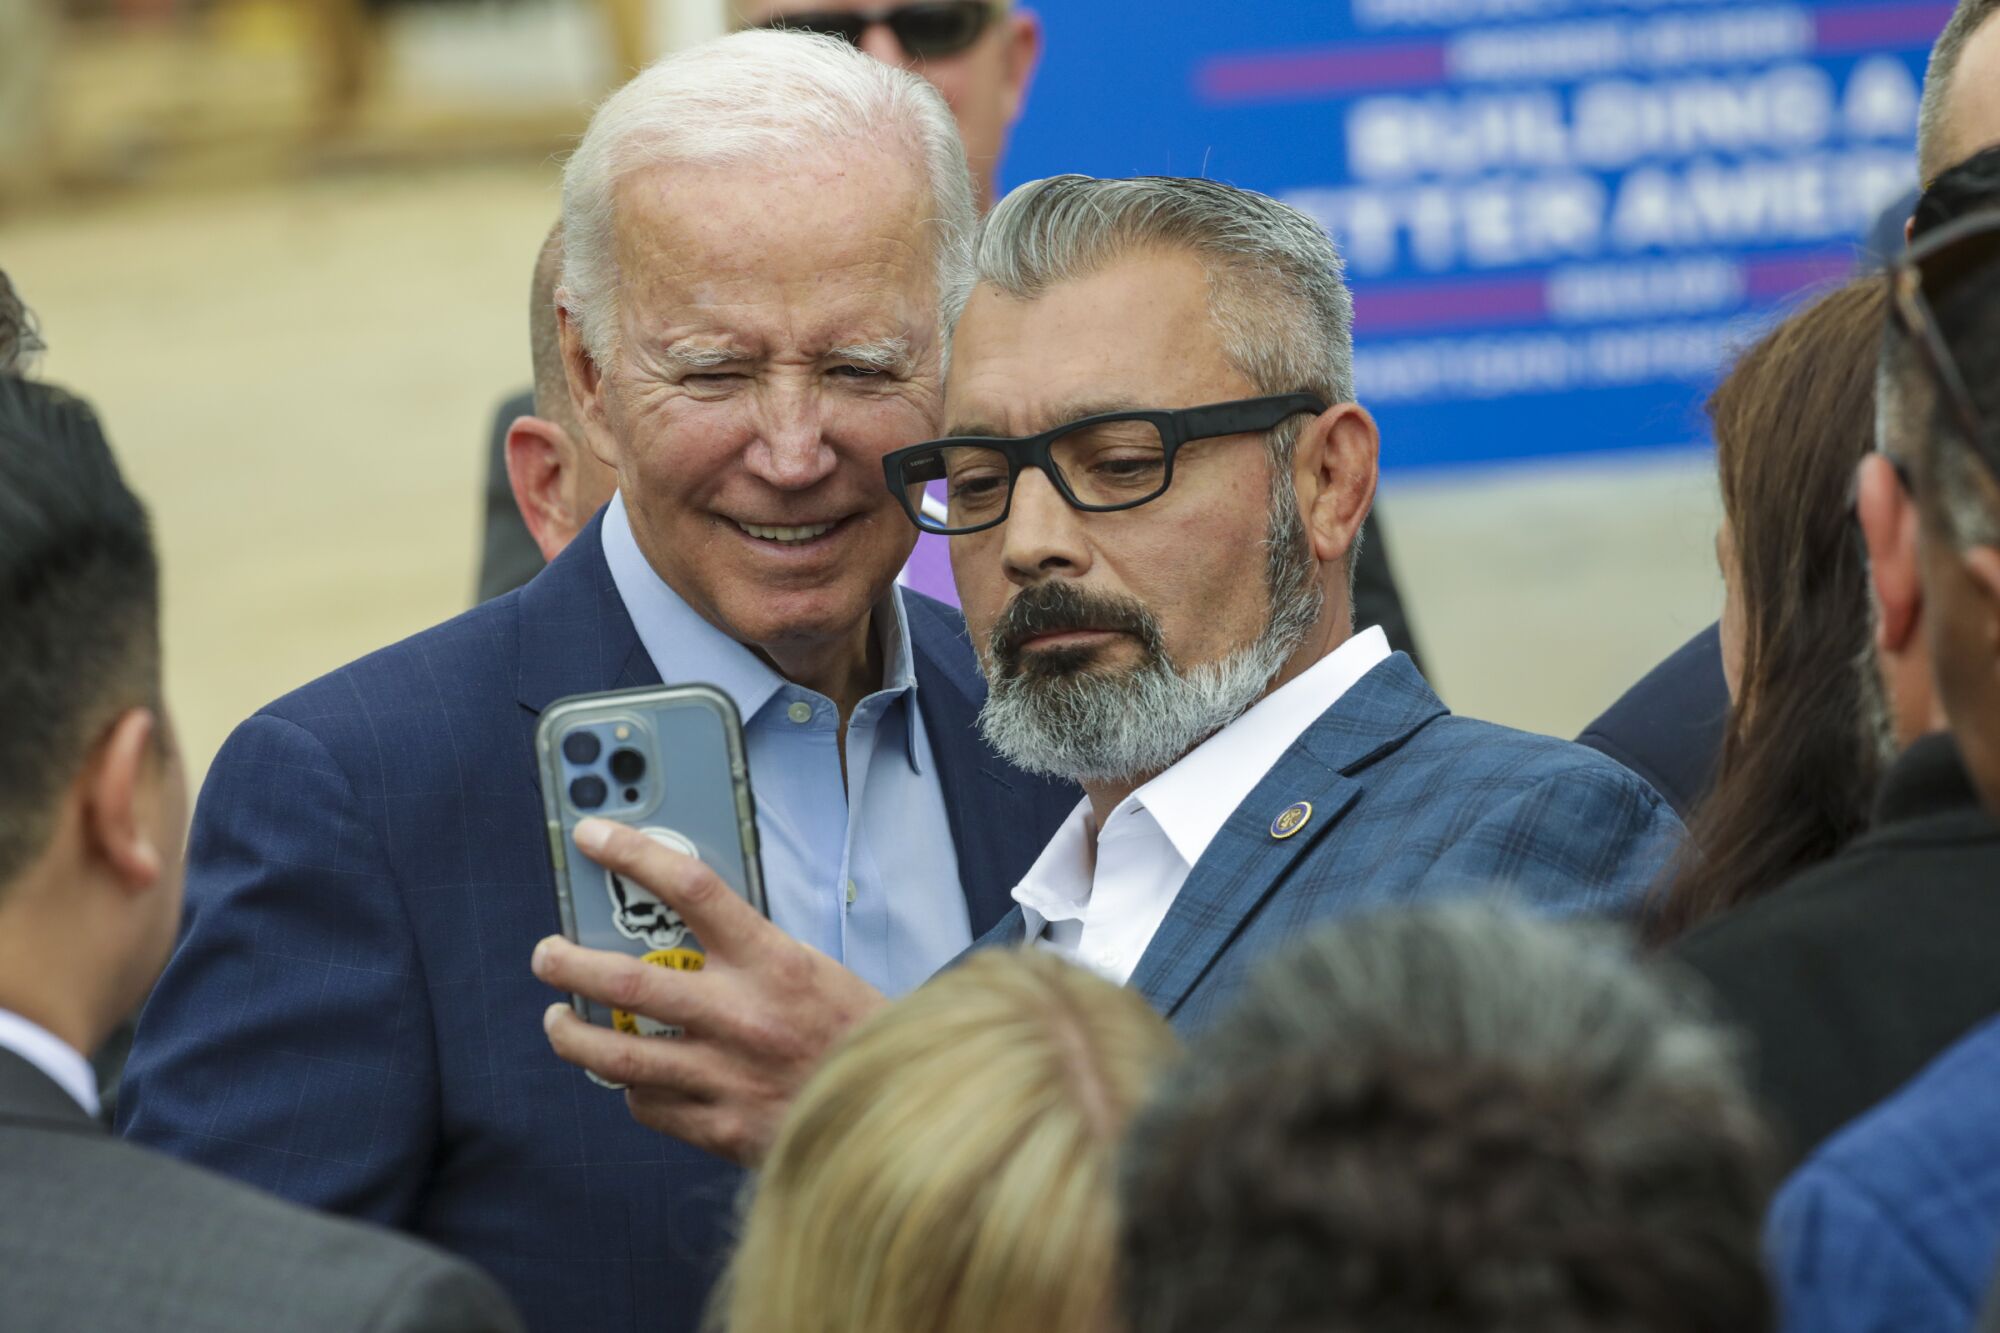 Guests get their selfie with President Joe Biden after visiting the construction site